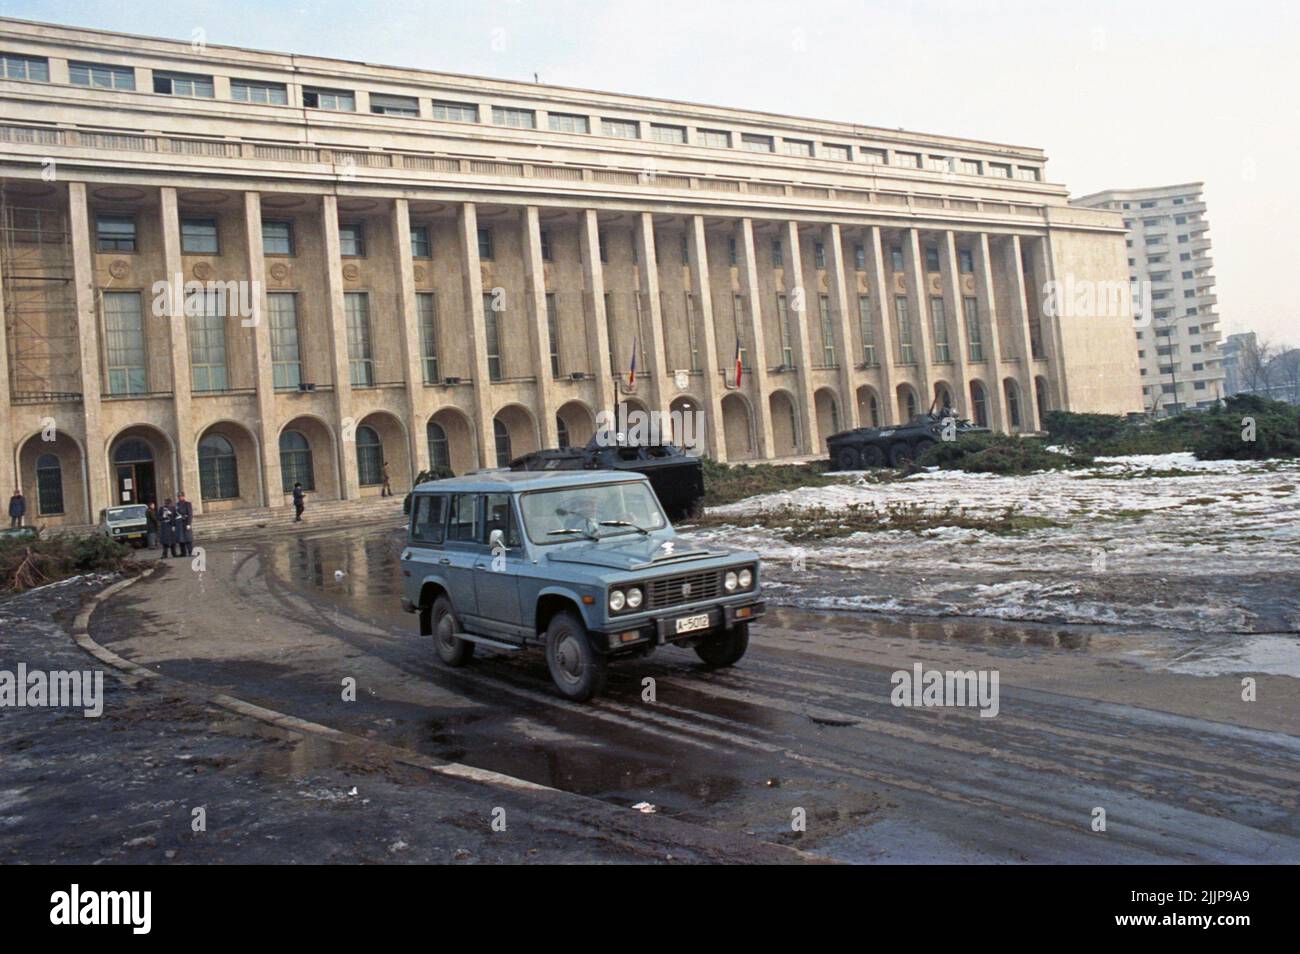 Bucharest, Romania, January 1990. Army in Piata Victoriei, in front of one of the most important governmental buildings, Victoria Palace, days after the Romanian Revolution of December 1989. Stock Photo